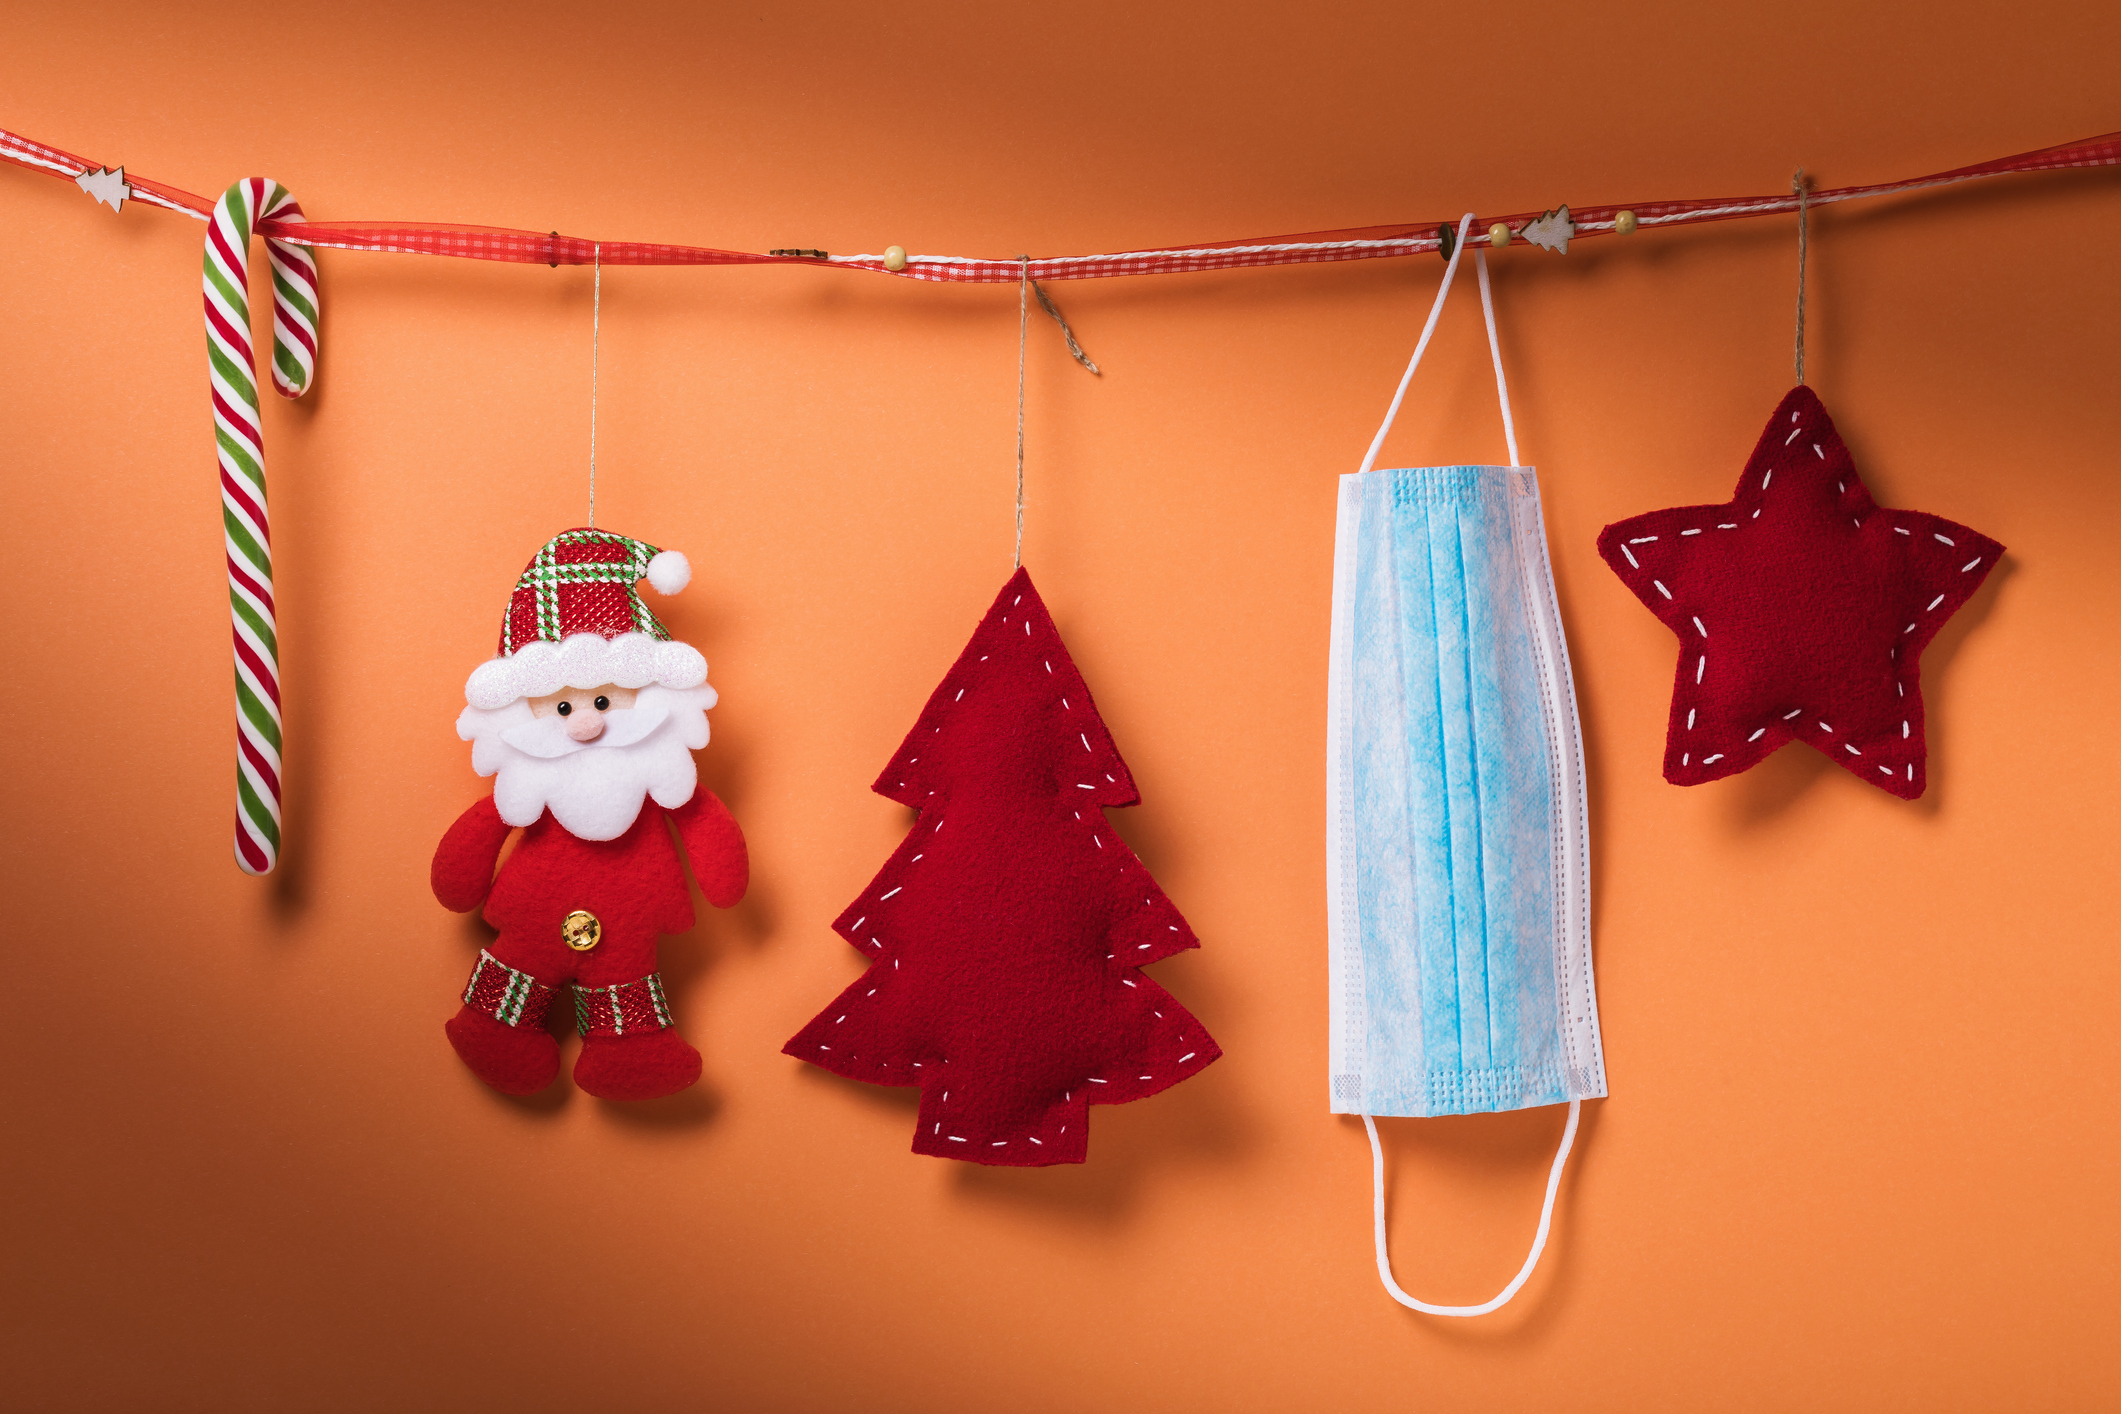 Christmas decorations and a medical mask hang on a decorative ribbon on an orange background